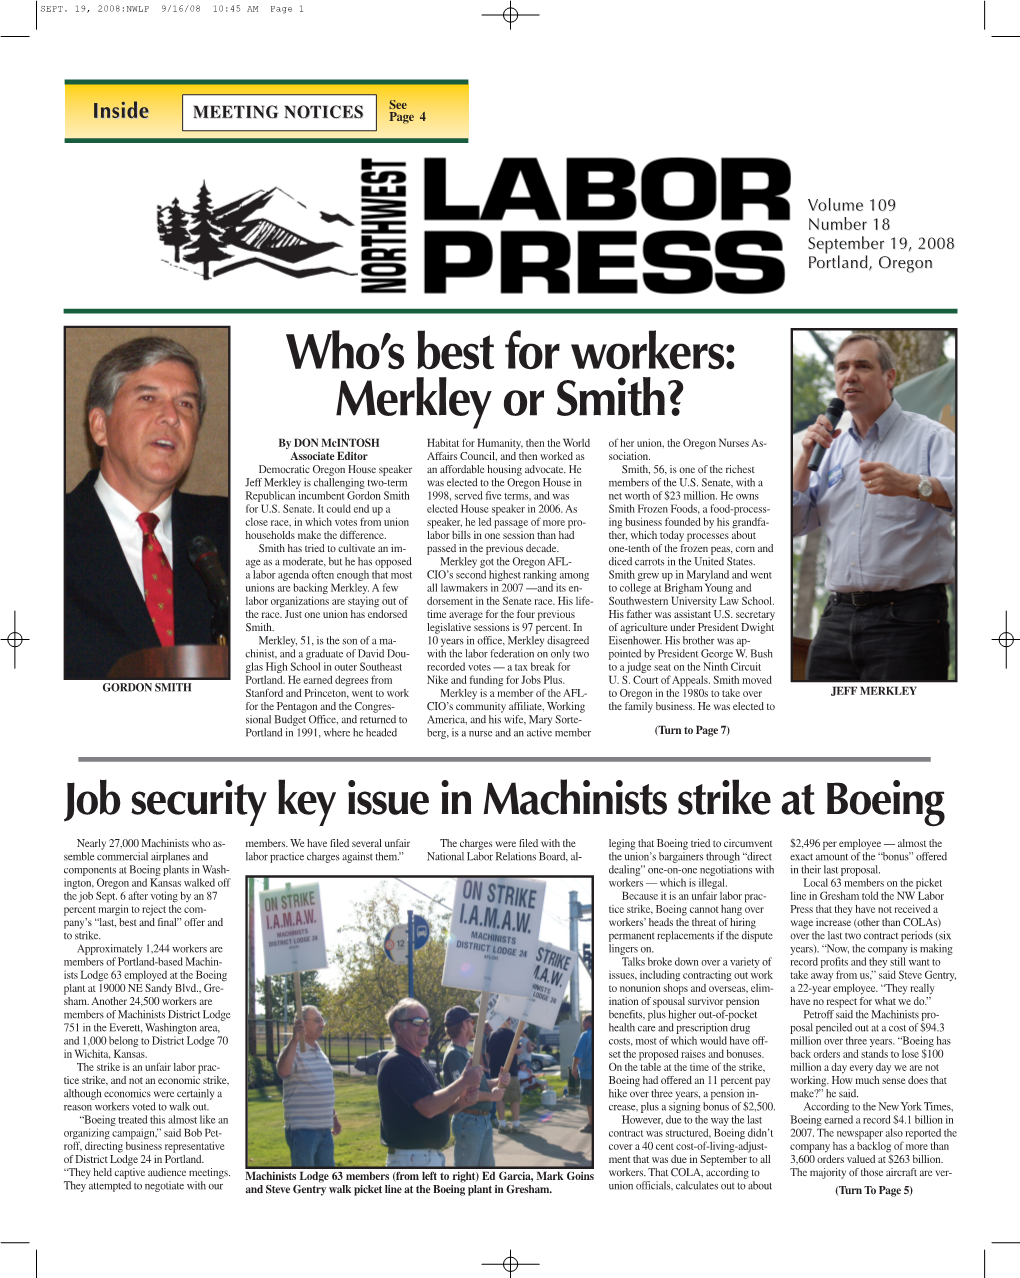 Who's Best for Workers: Merkley Or Smith?